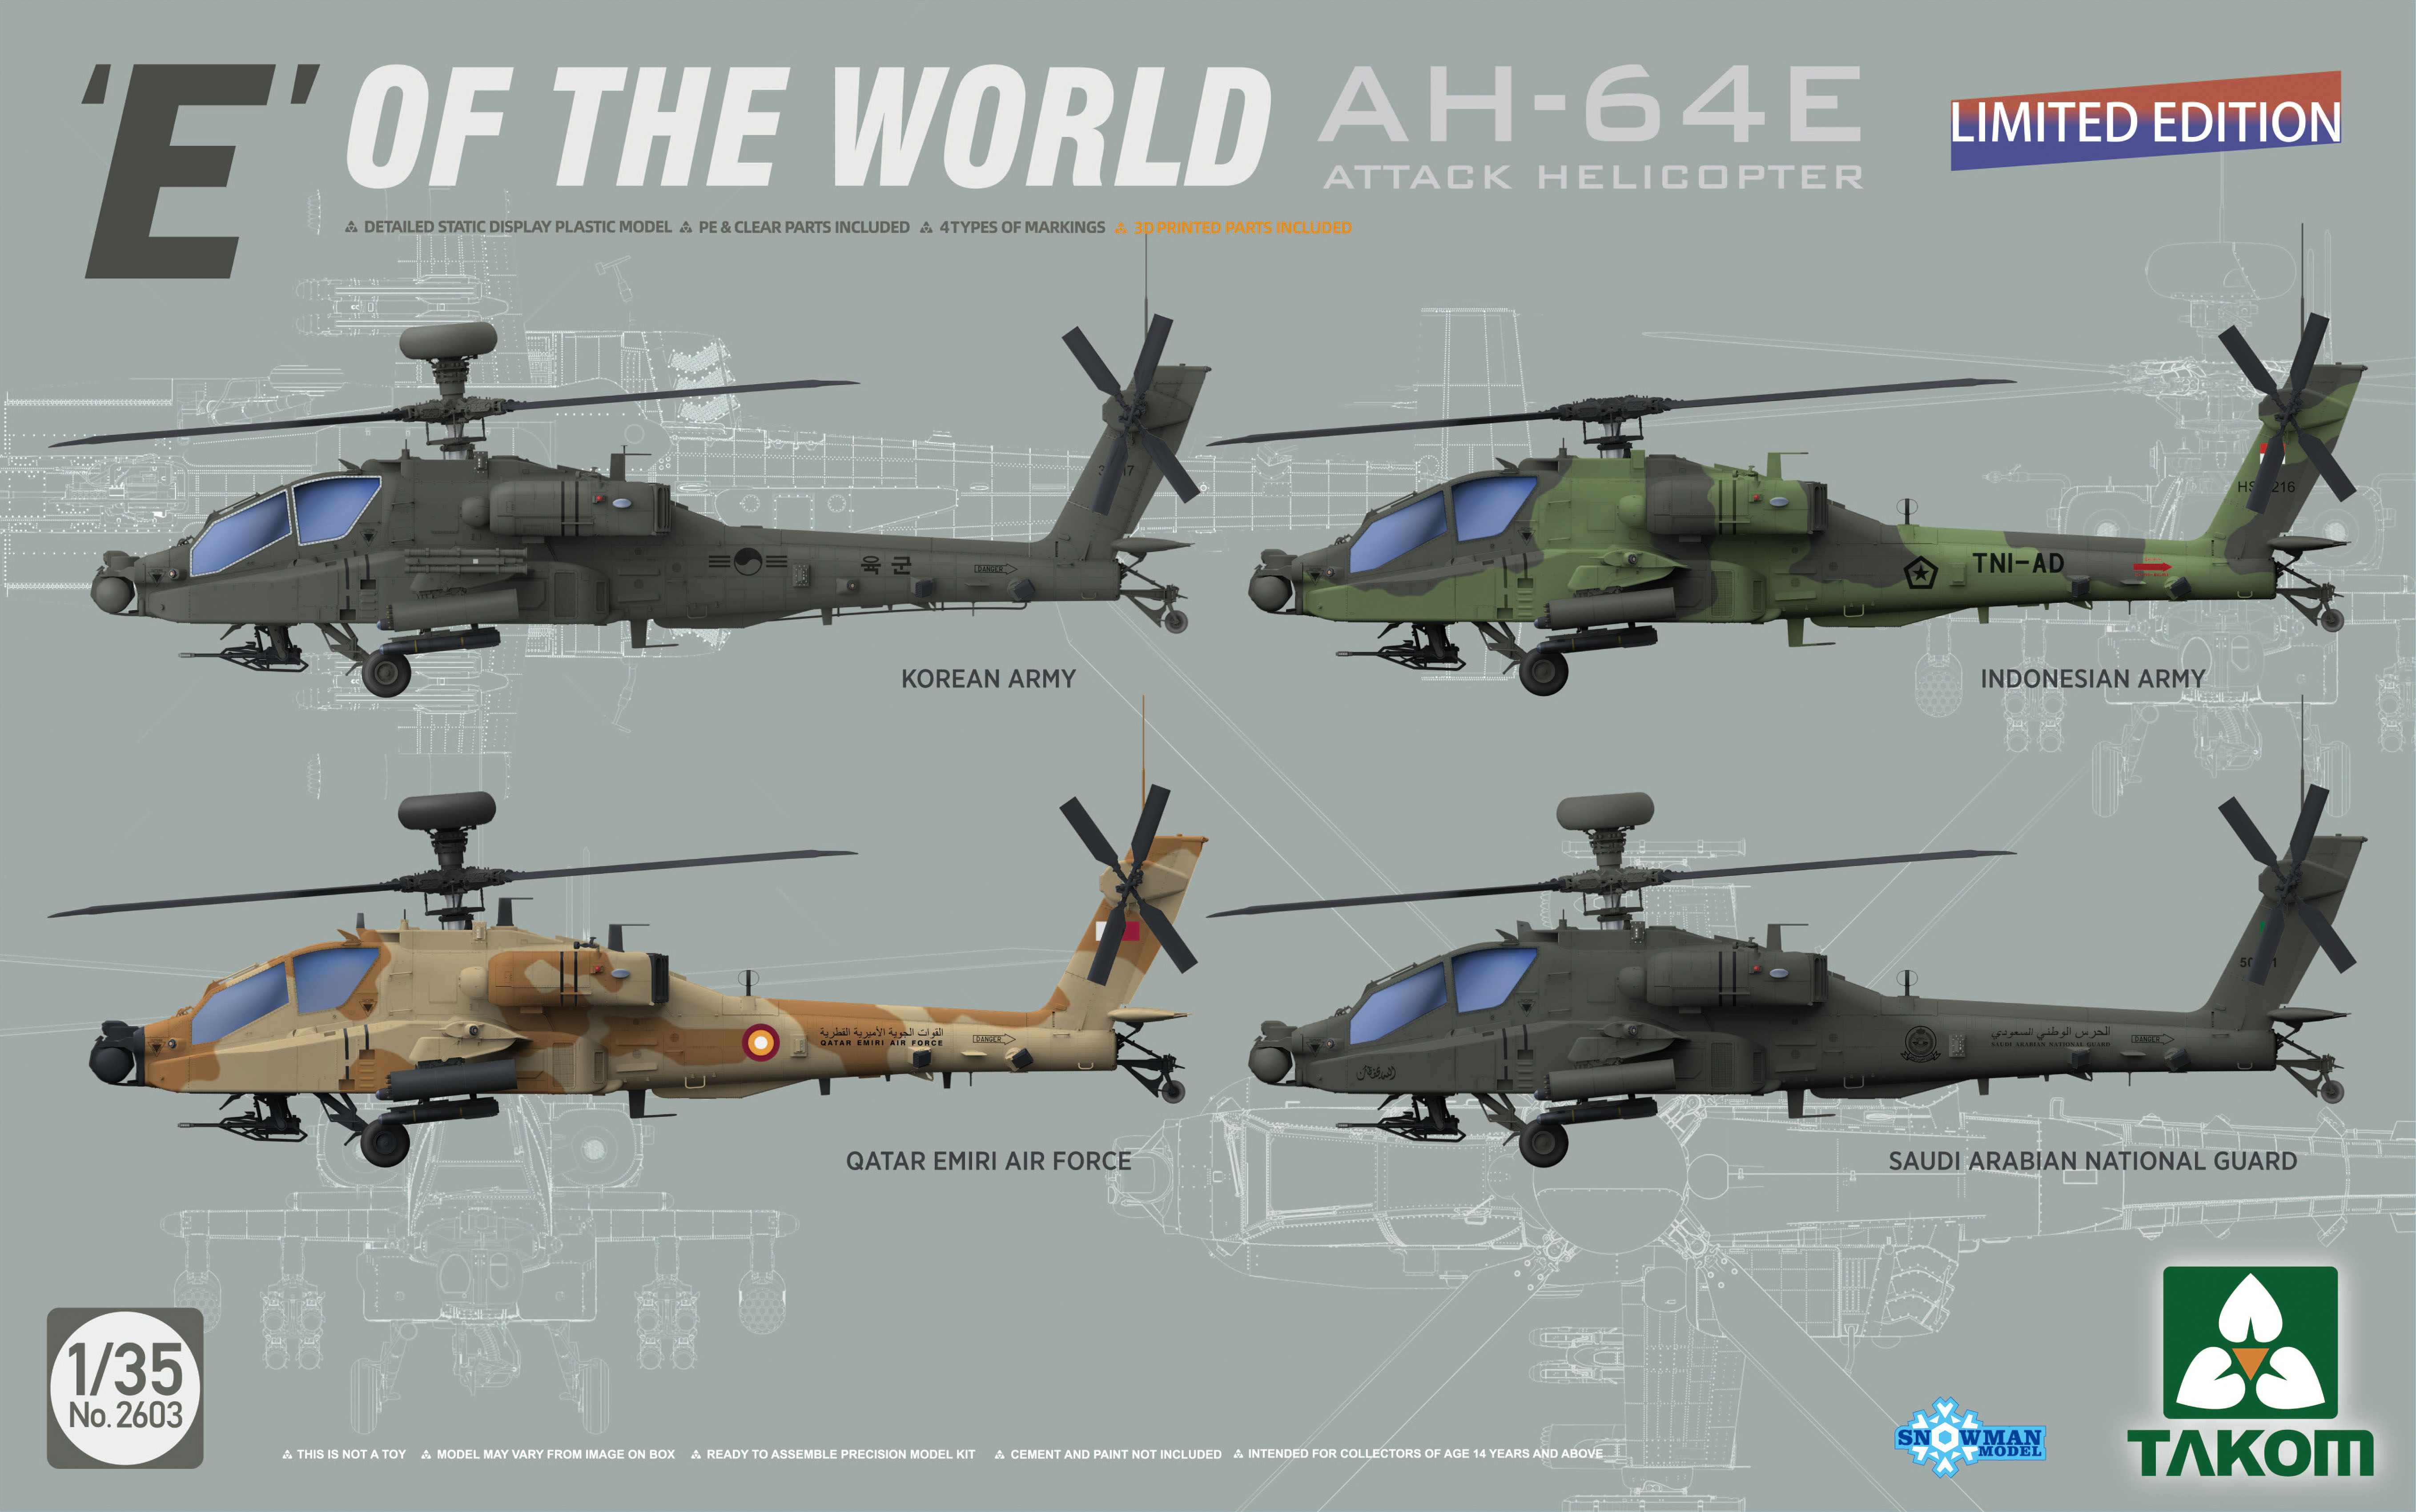 E of the World AH-64E Attack Helicopter - LIMITED EDITION